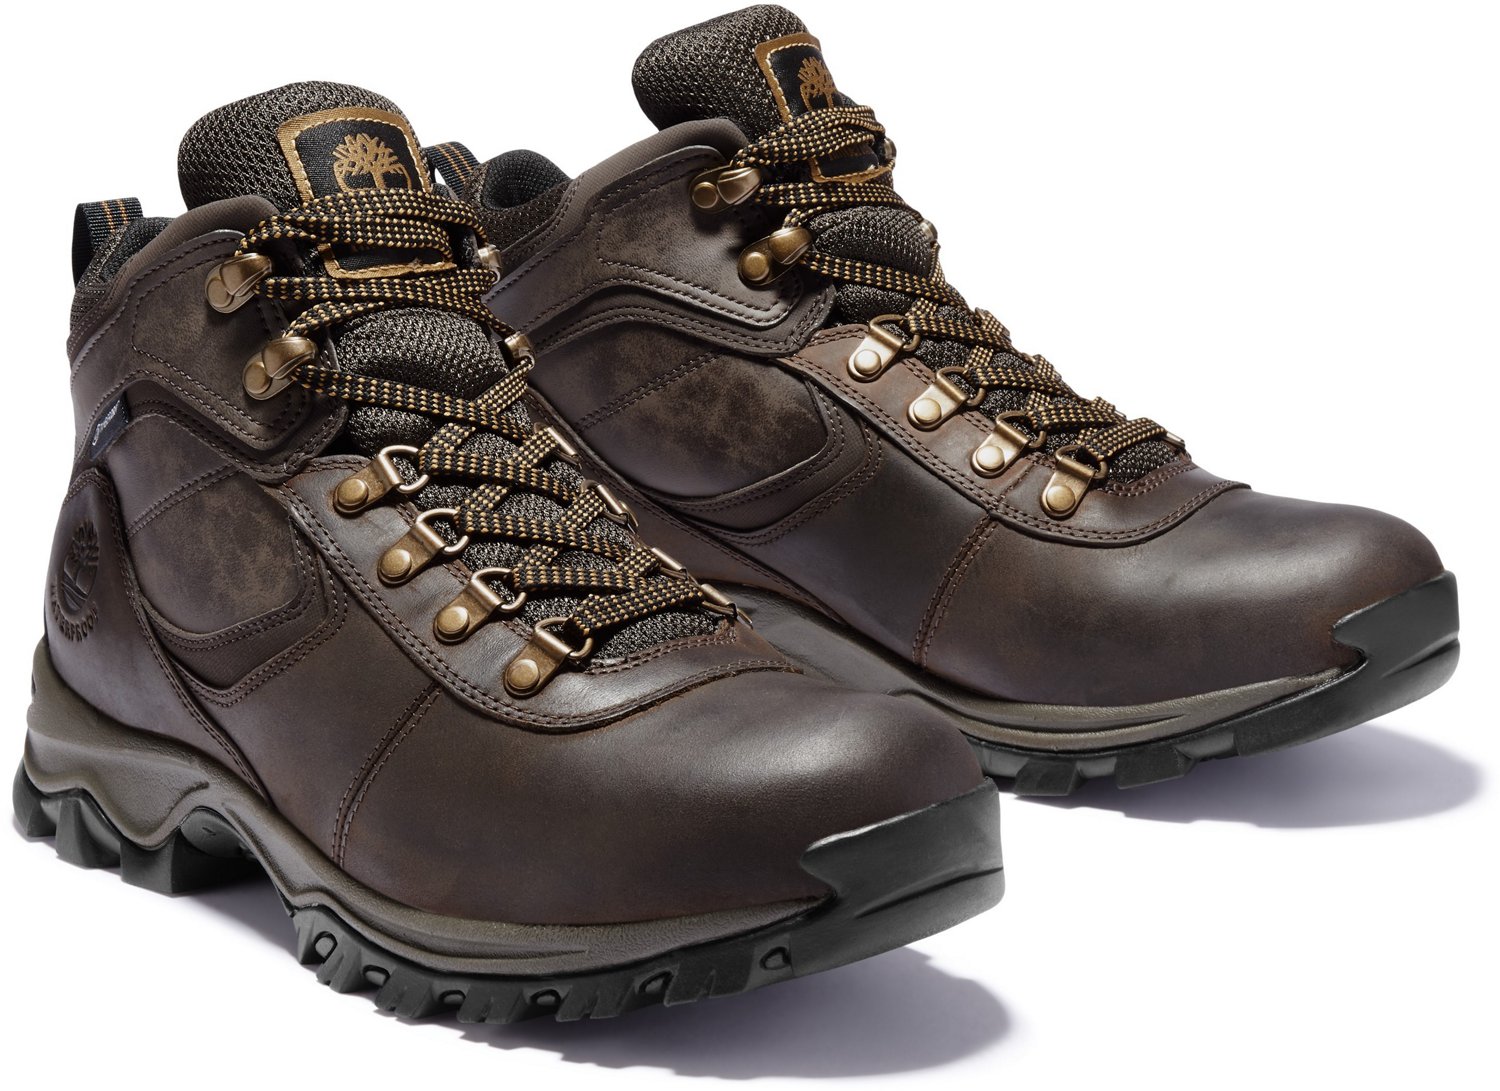 Timberland Men's Mt. Maddsen Waterproof Mid Hiking Boots                                                                         - view number 3